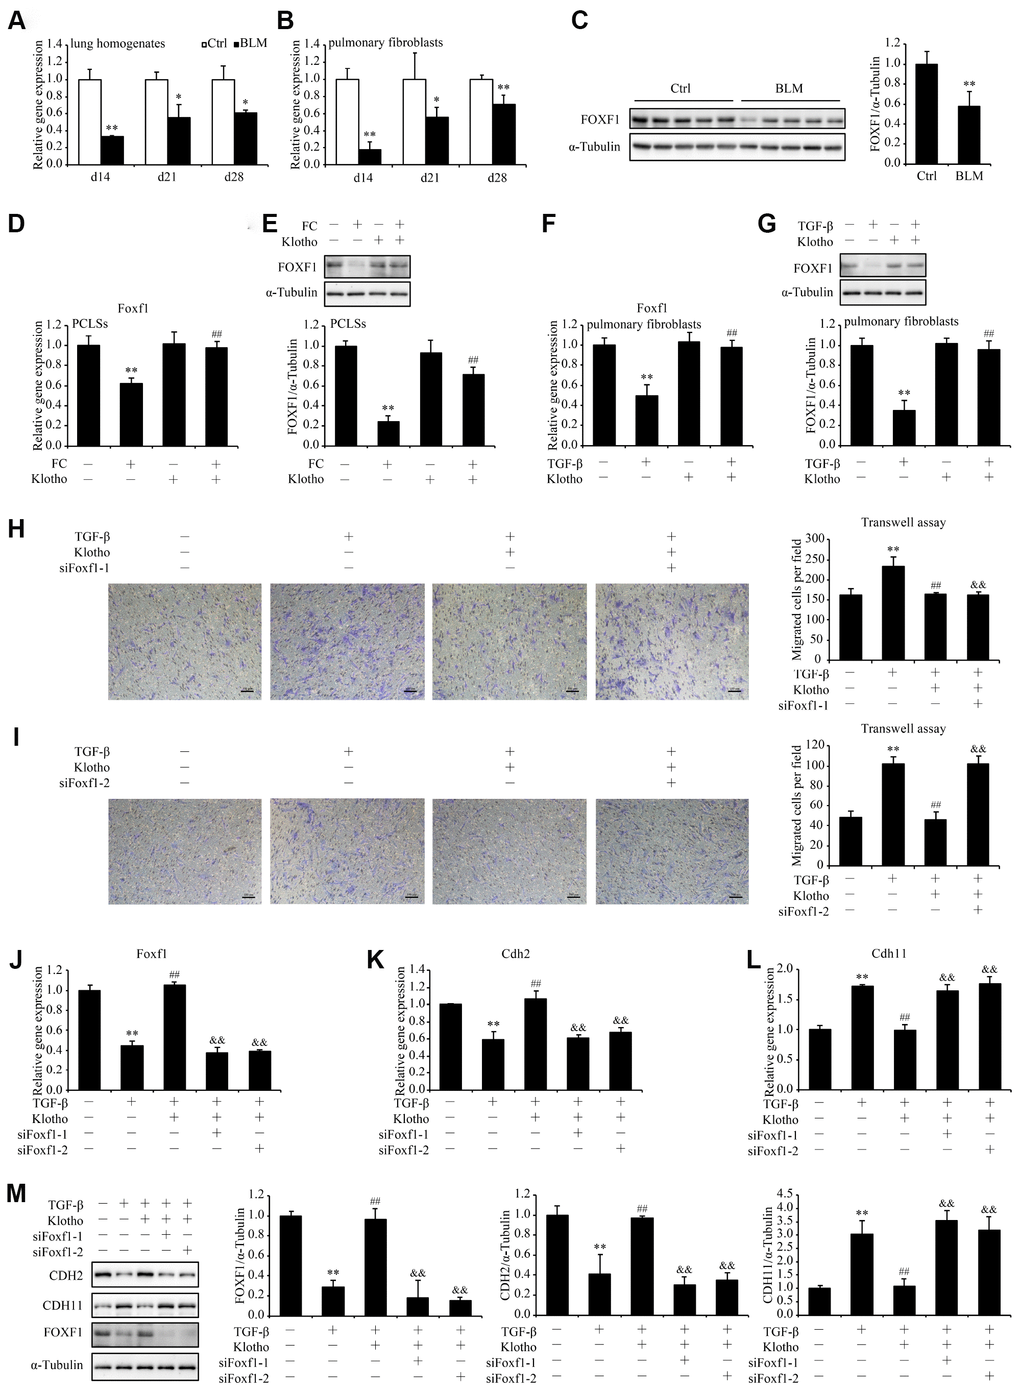 Foxf1 deletion reverses the inhibitory effect of Kl on pulmonary fibroblasts migration. mRNA levels of Foxf1 were measured by qPCR in the total lung lysates (A) and isolated pulmonary fibroblasts (B) from mice 14, 21, and 28 days after intratracheally administering a single dose of PBS (Ctrl, white bars) or bleomycin (BLM, black bars). Protein levels of FOXF1 (C) were examined by western blotting in the total lung lysates from mice 21 days administering a single dose of PBS (Ctrl) or bleomycin (BLM). *P P vs. Ctrl. 5-7 animals per group. Mouse PCLSs pre-incubated with or without mouse rKL for 24 h were randomized to be treated with control cocktail (CC) or fibrosis cocktail (FC) with or without rKL for another 48 h, when mRNA (D) and protein (E) levels of Foxf1 in the mouse PCLSs from each group were measured by qPCR and western blotting, respectively. **P vs. with CC and without rKL. ##P vs. with FC and without rKL. Primary pulmonary fibroblasts isolated from wild type C57BL/6 mice were pre-incubated with or without mouse rKL. After 12 h, they were randomized to be incubated with or without TGF-β and rKL for another 24 h when mRNA (F) and protein (G) levels of Foxf1 were examined by qPCR and western blotting, respectively. **P vs. without TGF-β and without rKL. ##P vs. with TGF-β and without rKL. Primary pulmonary fibroblasts isolated from wild type C57BL/6 mice were transfected with control siRNA (siNC) or Foxf1 siRNAs (siFoxf1-1 and -2). After siRNA transfection for 24 h, fibroblasts were pre-incubated with or without mouse rKL for 12 h, followed by treatment with or without TGF-β and rKL for another 24 h, when migration of pulmonary fibroblasts were analyzed by transwell assay (H and I, Scale bars = 100 μm), mRNA (J–L) and protein levels (M) of Foxf1, Cdh2, and Cdh11 were measured by qPCR and western blotting, respectively. **P vs. siNC without TGF-β or rKL. ##P vs. siNC with TGF-β and without rKL. &&P vs. siNC with TGF-β and rKL.